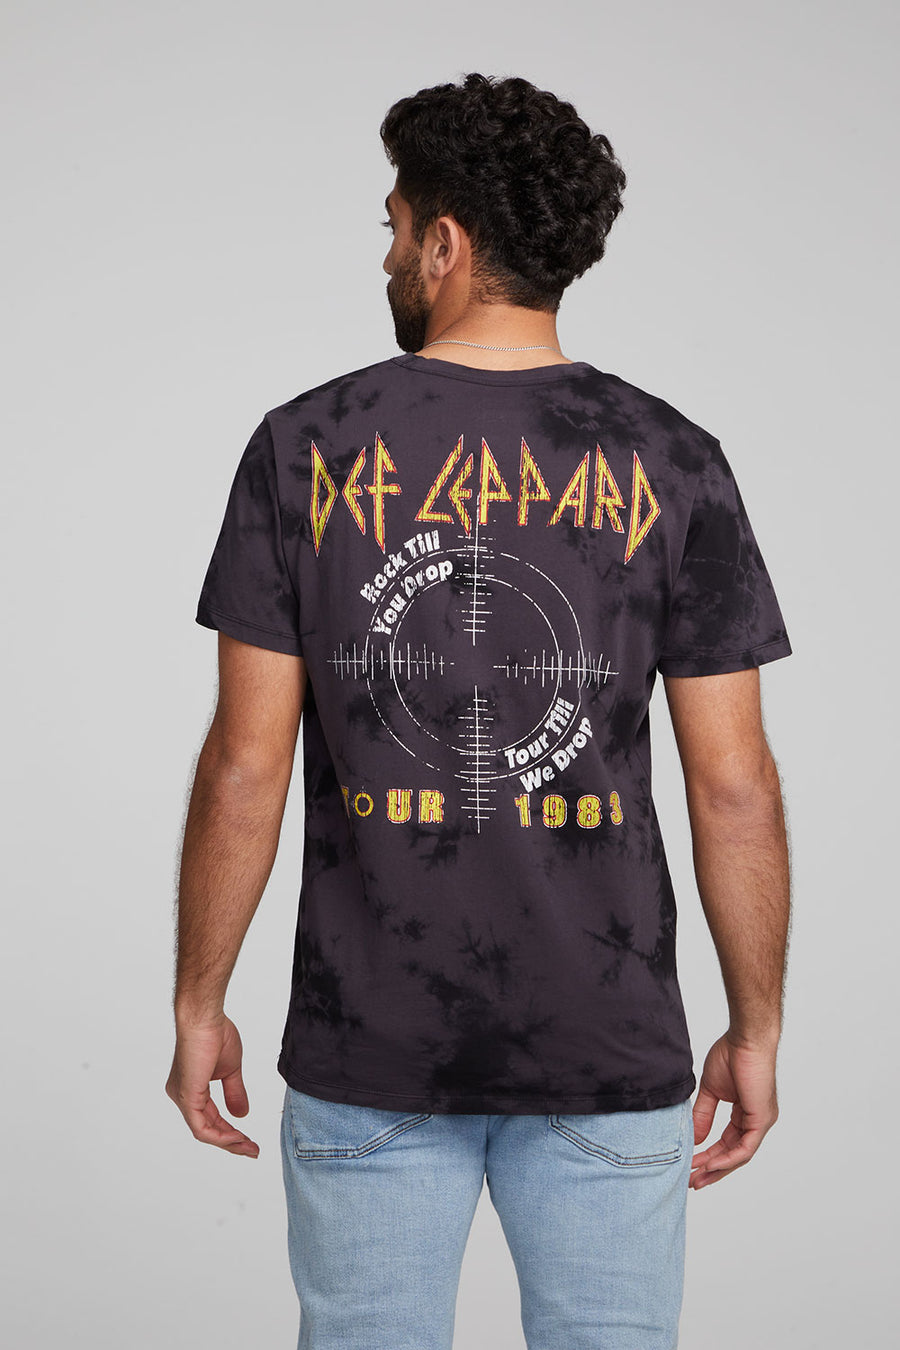 Def Leppard Pyromania Tour Crew Neck Tee MENS chaserbrand